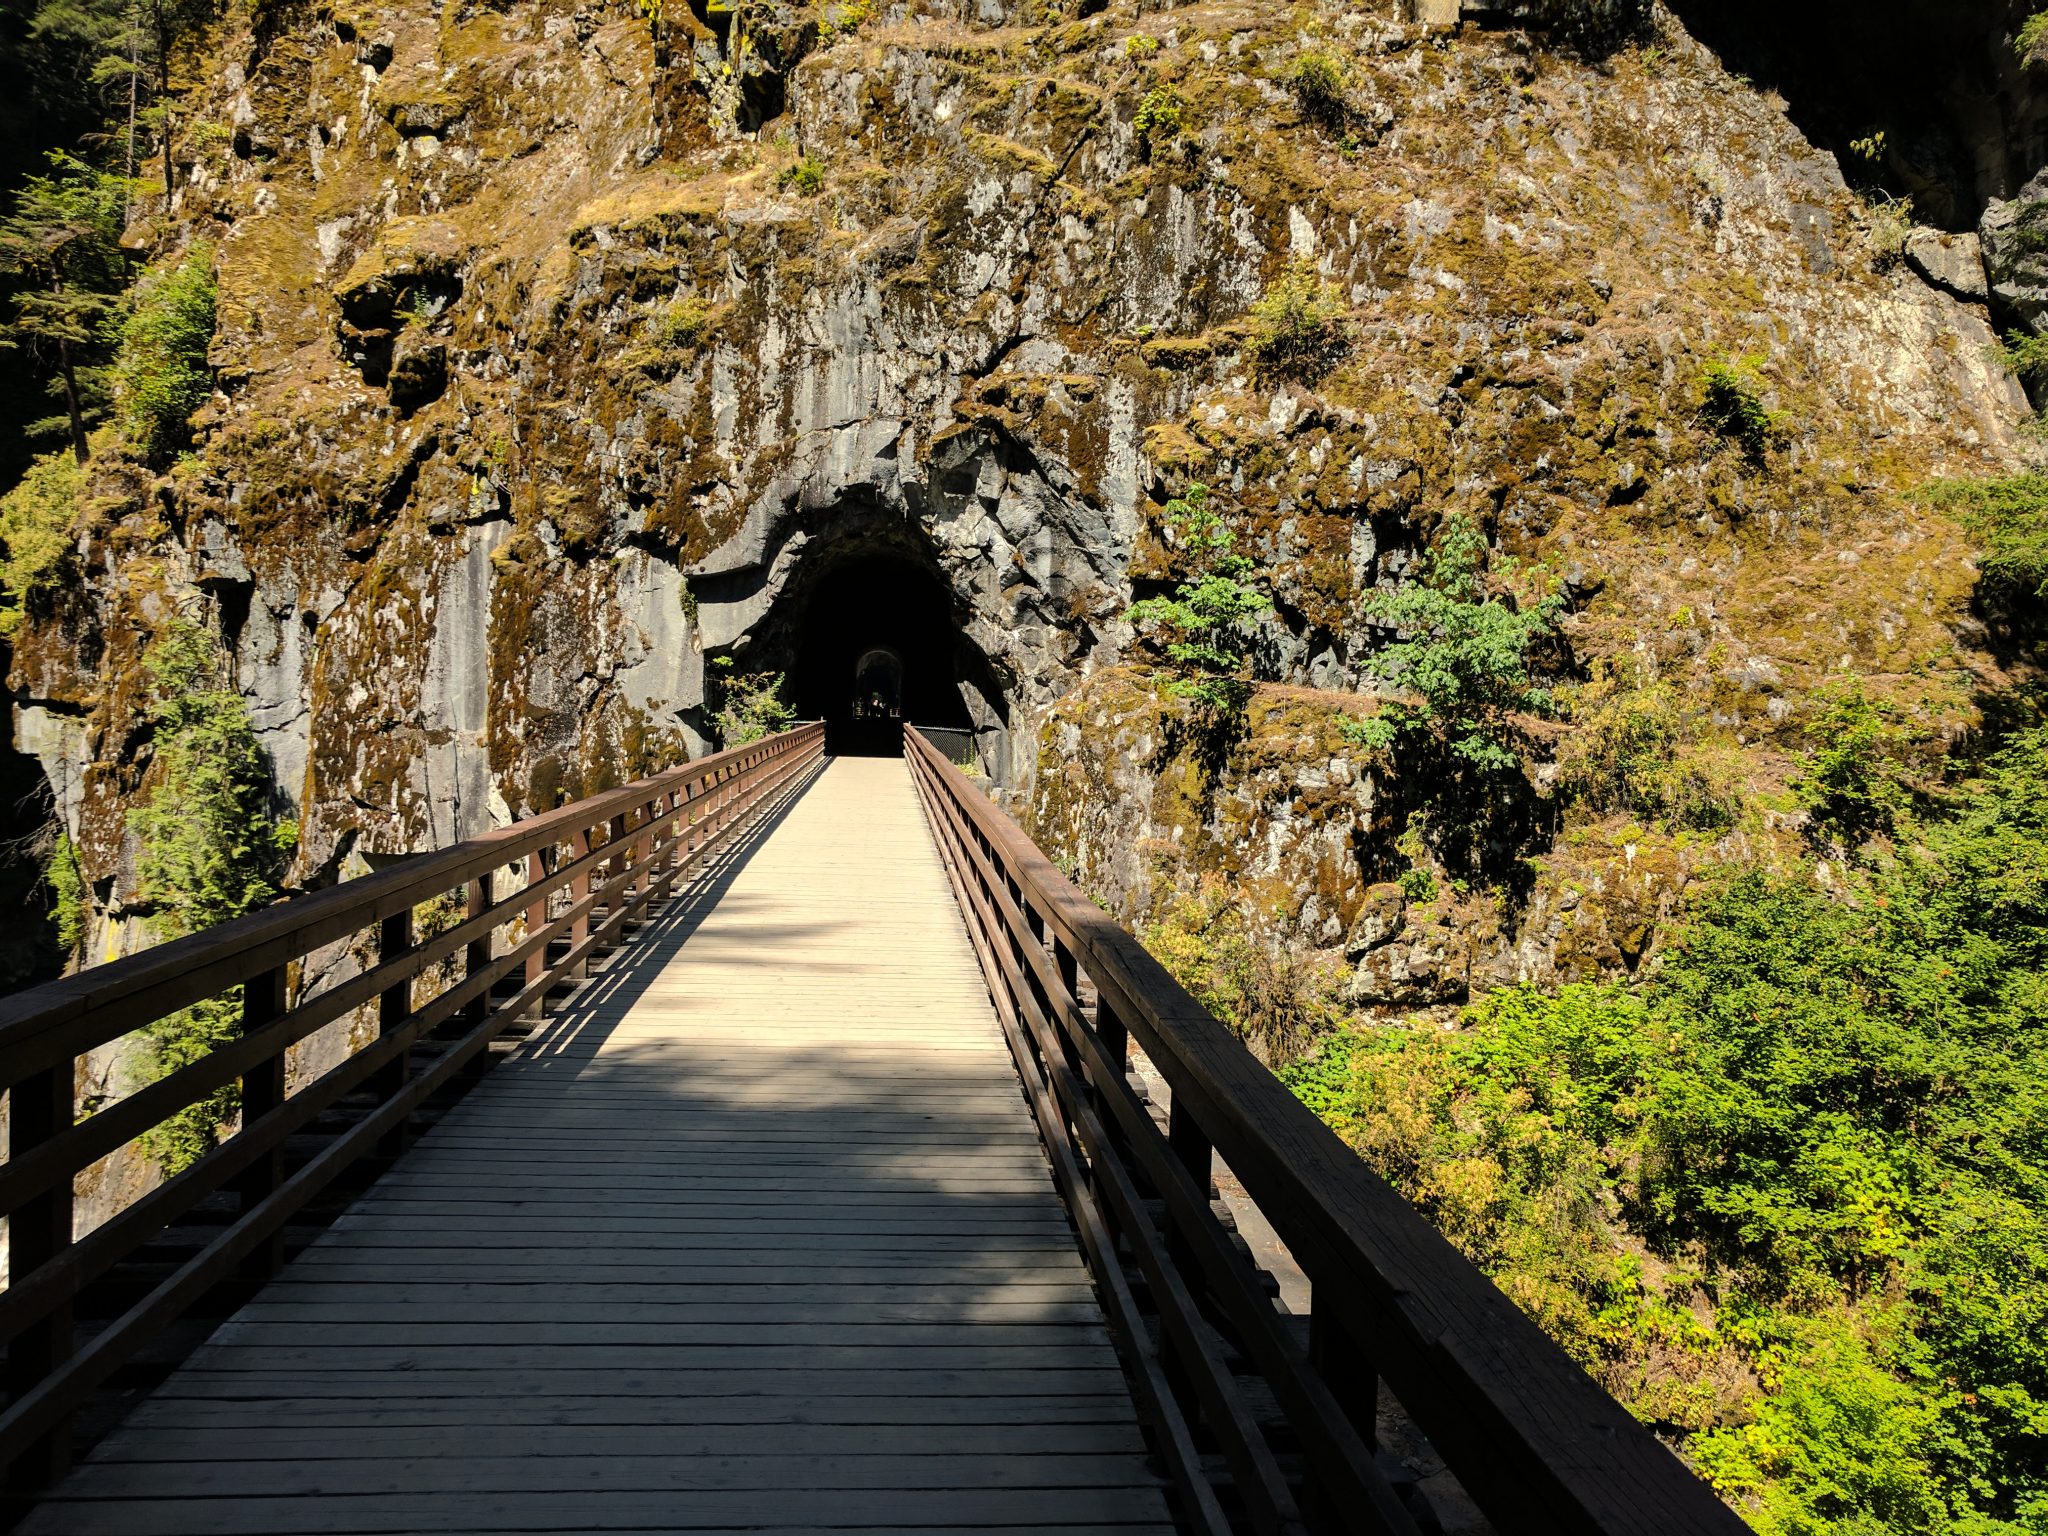 Footbridge going into a tunnel at Othello Tunnels near Hope British Columbia Canada